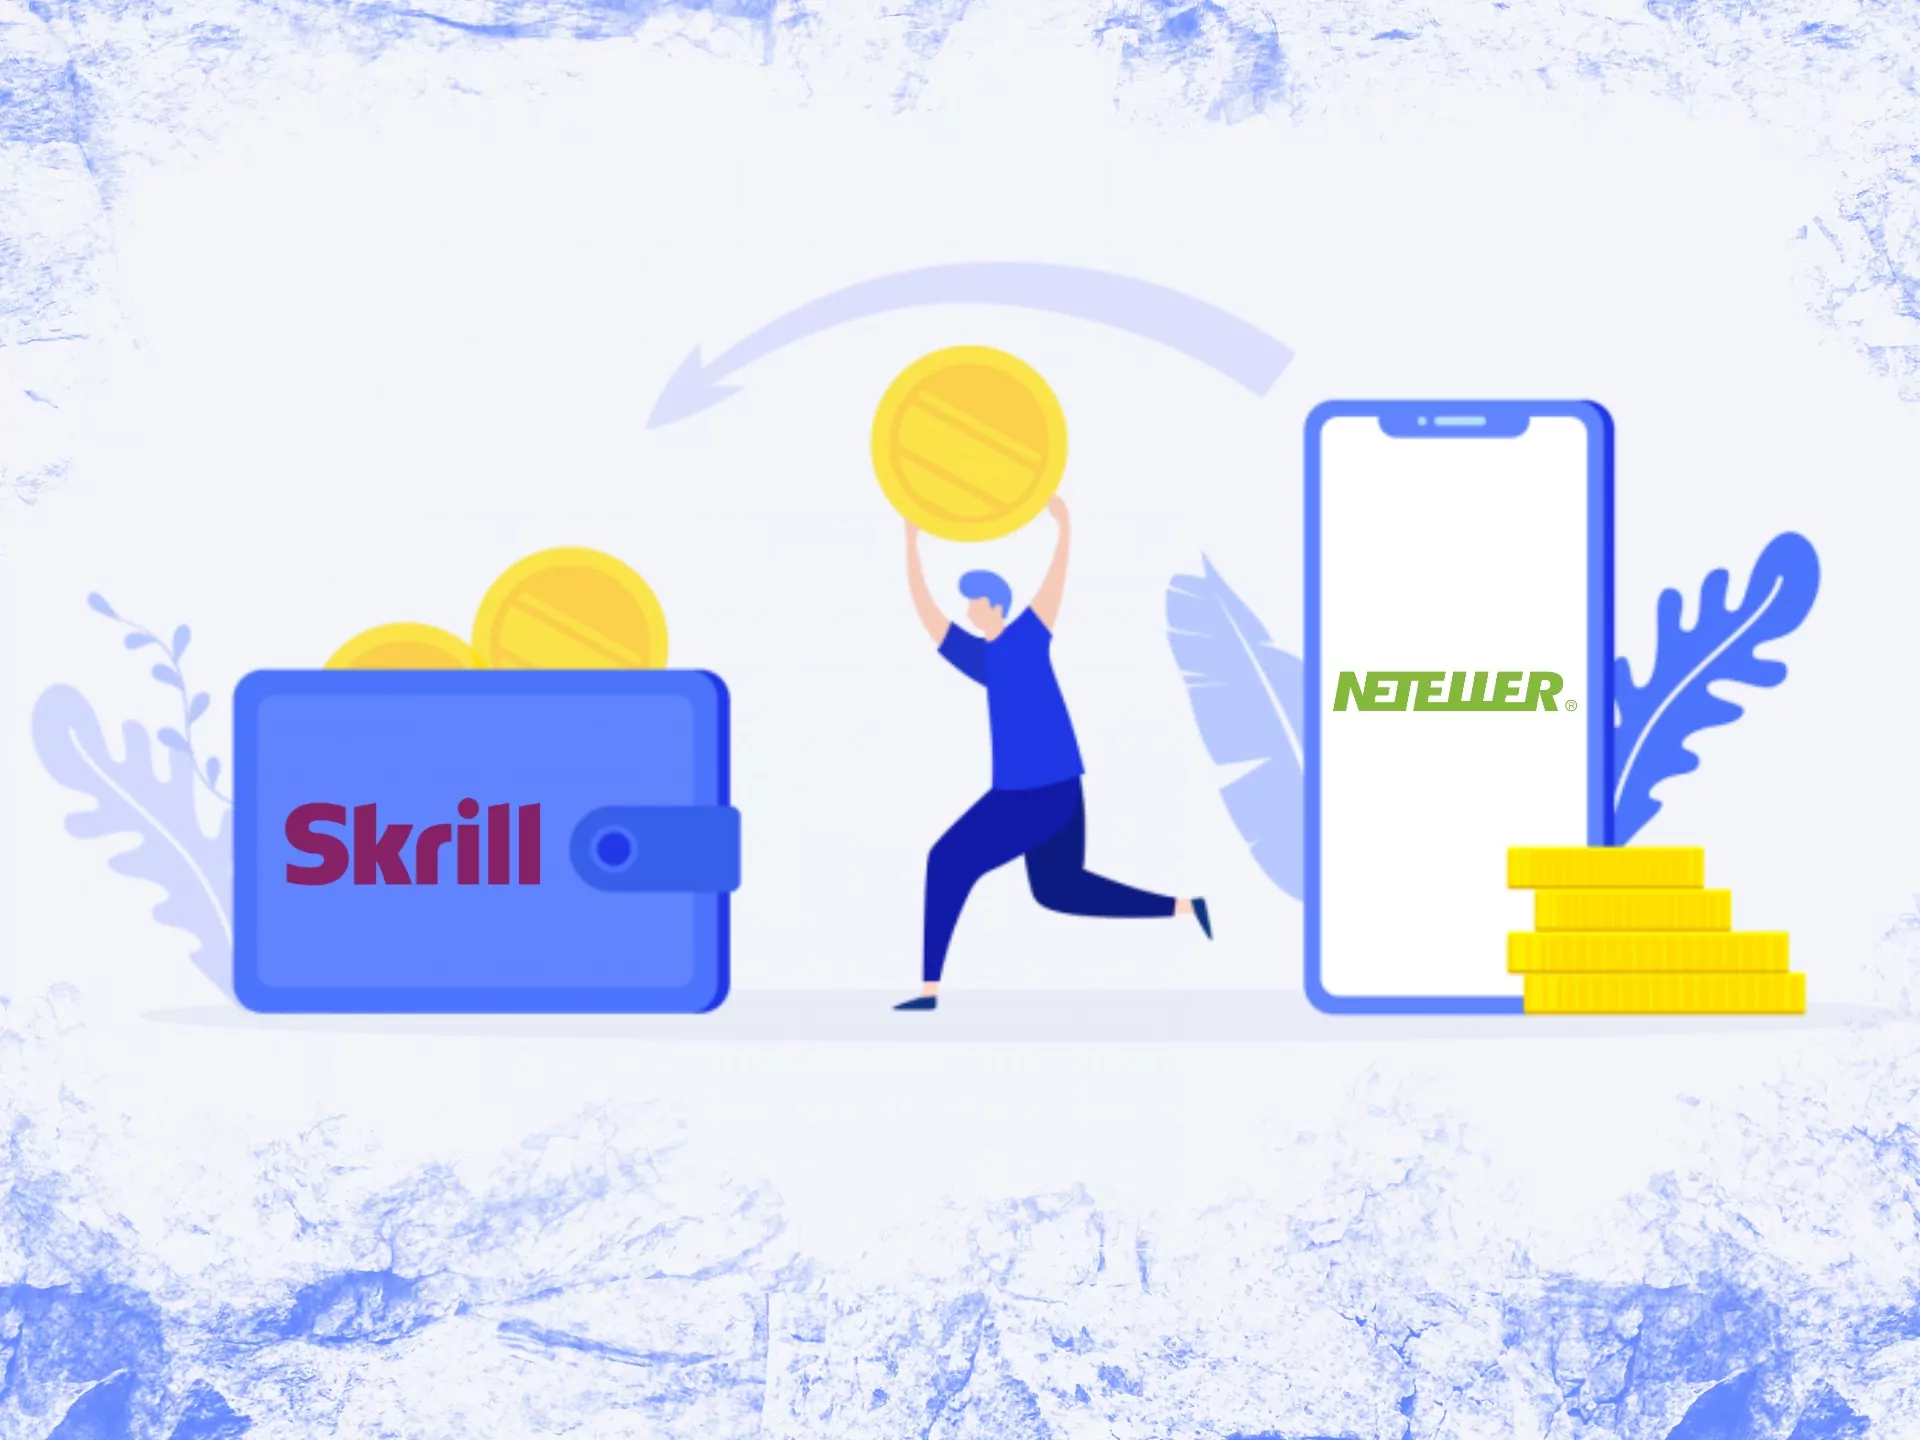 Neteller-to-Sktill transactions are very simple and fast.